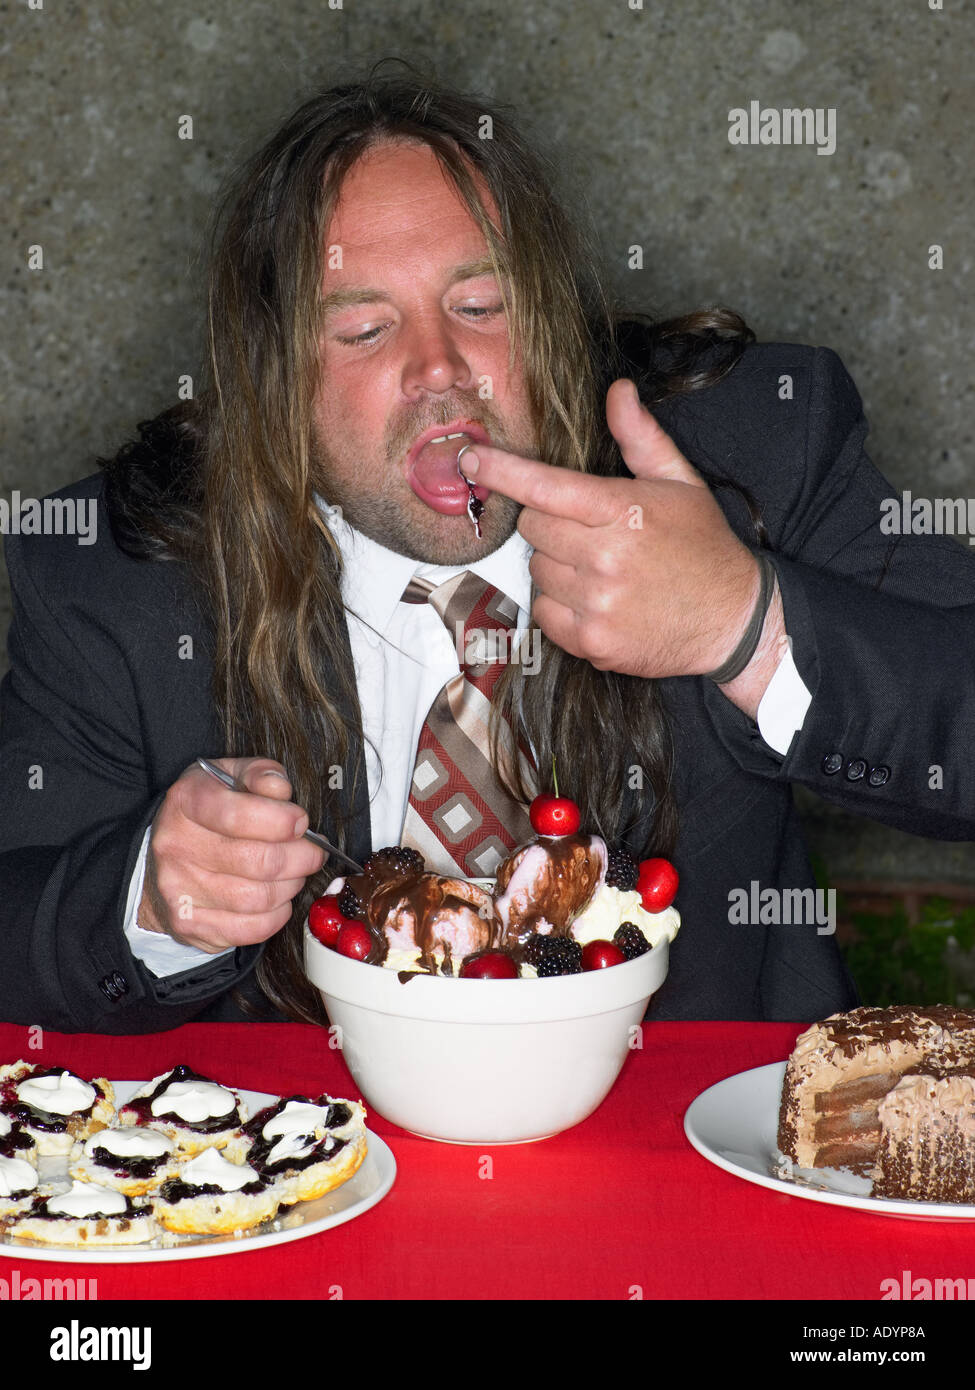 Long haired fat man eating stuffing himself with cake and ice cream Stock Photo